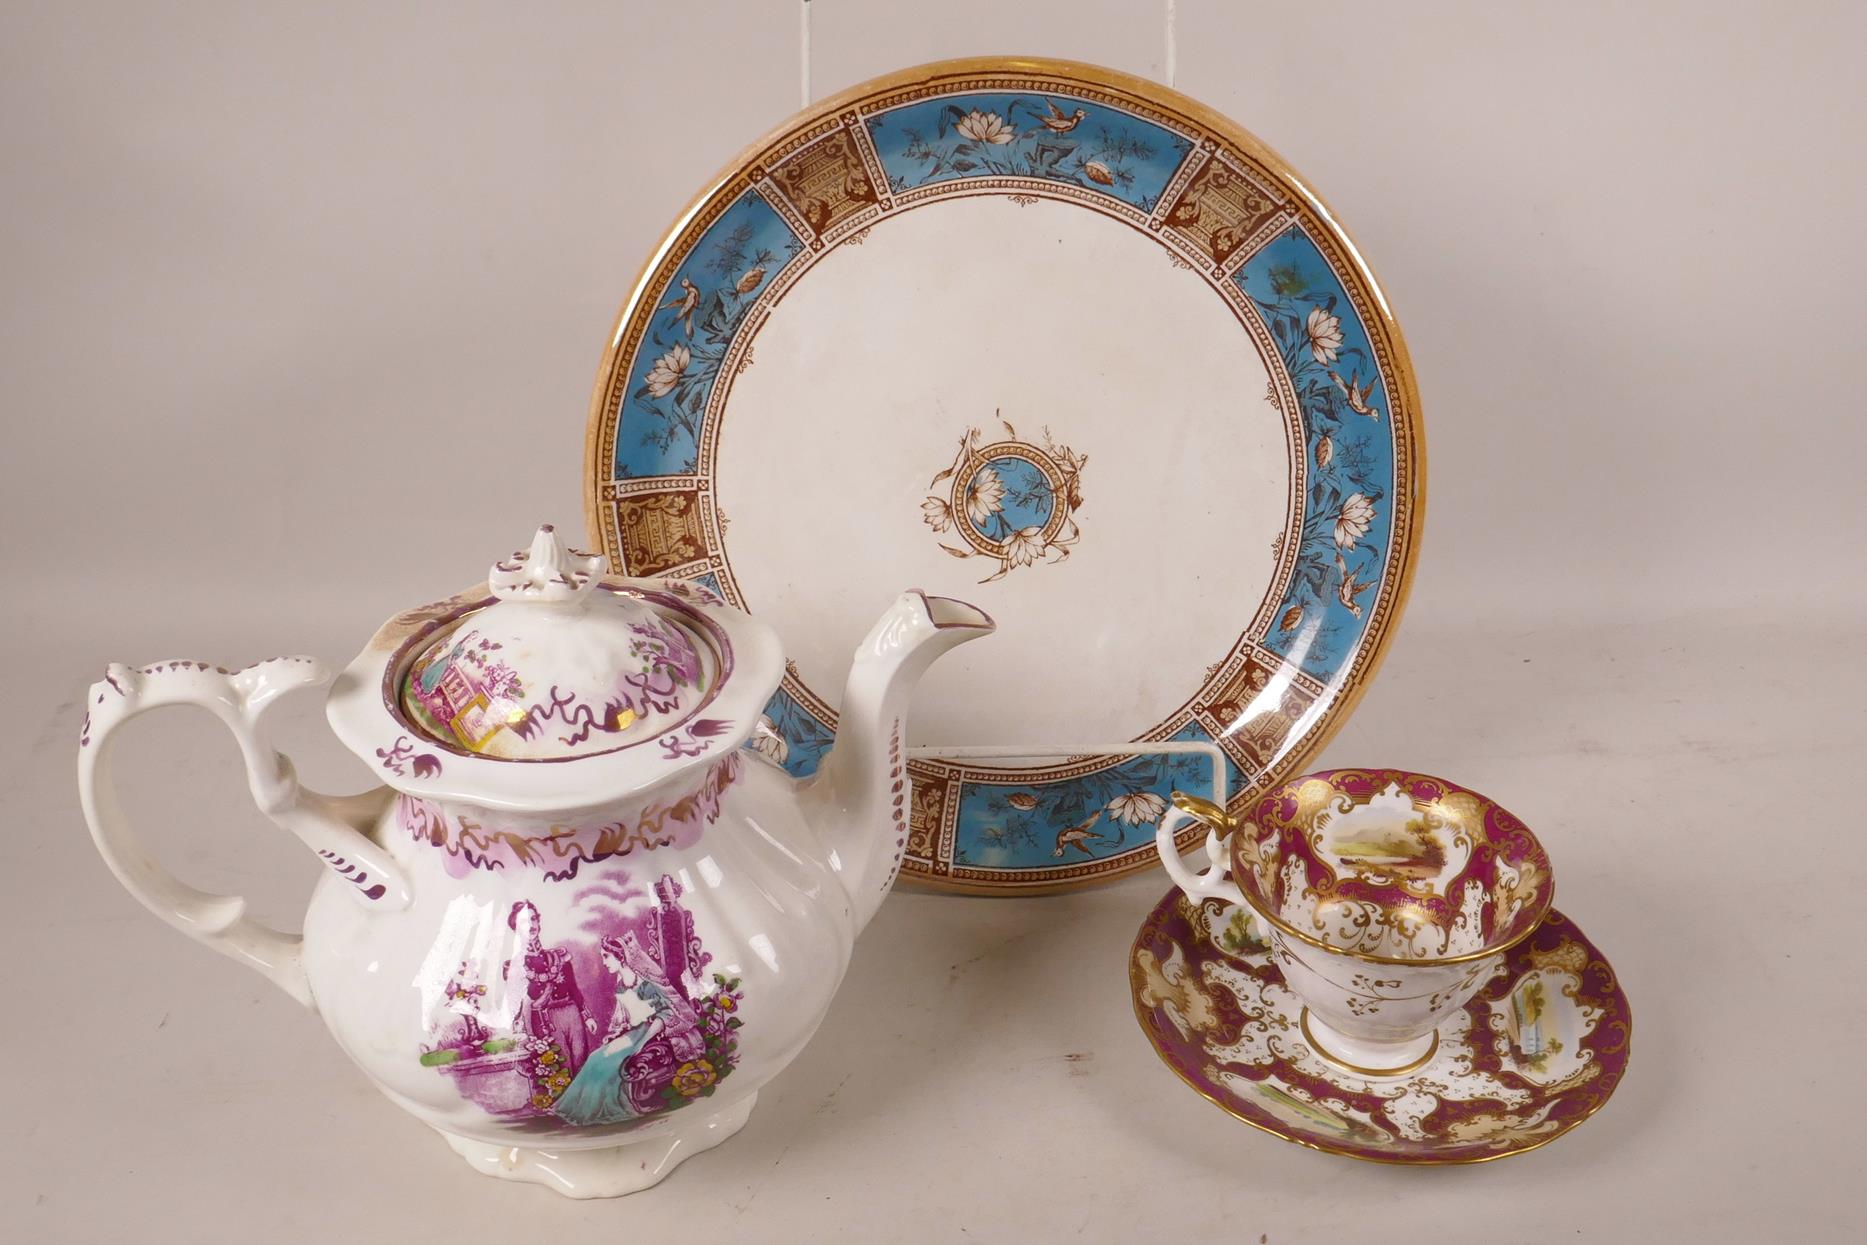 A C19th Edge Malkin porcelain cheese stand, the border printed with classical urns, birds and